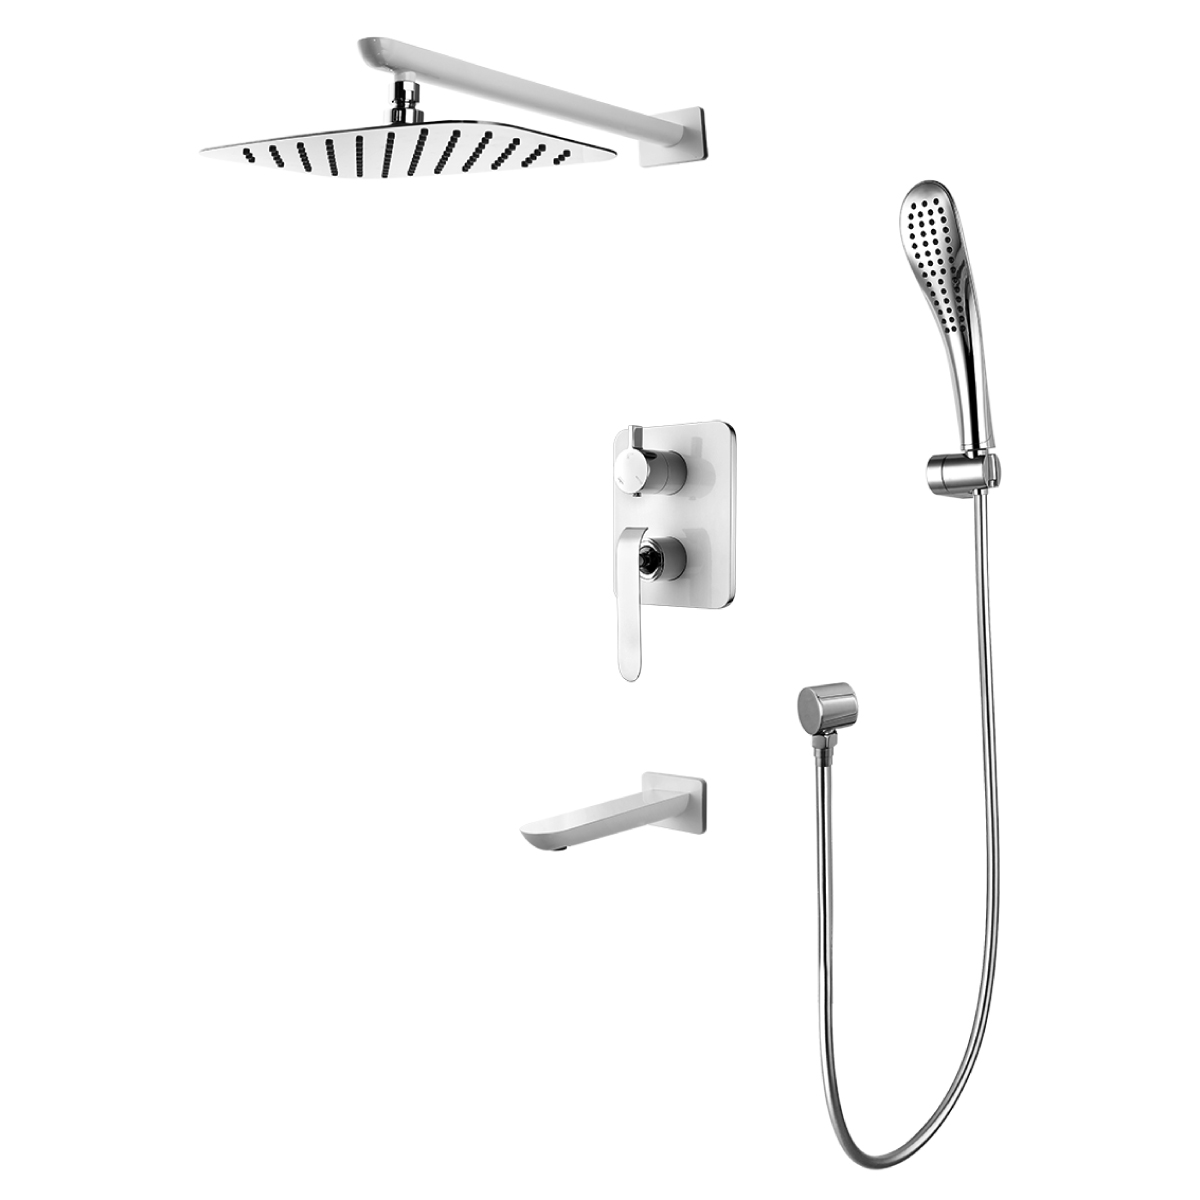 LM4922CW Built-in bath and shower faucet